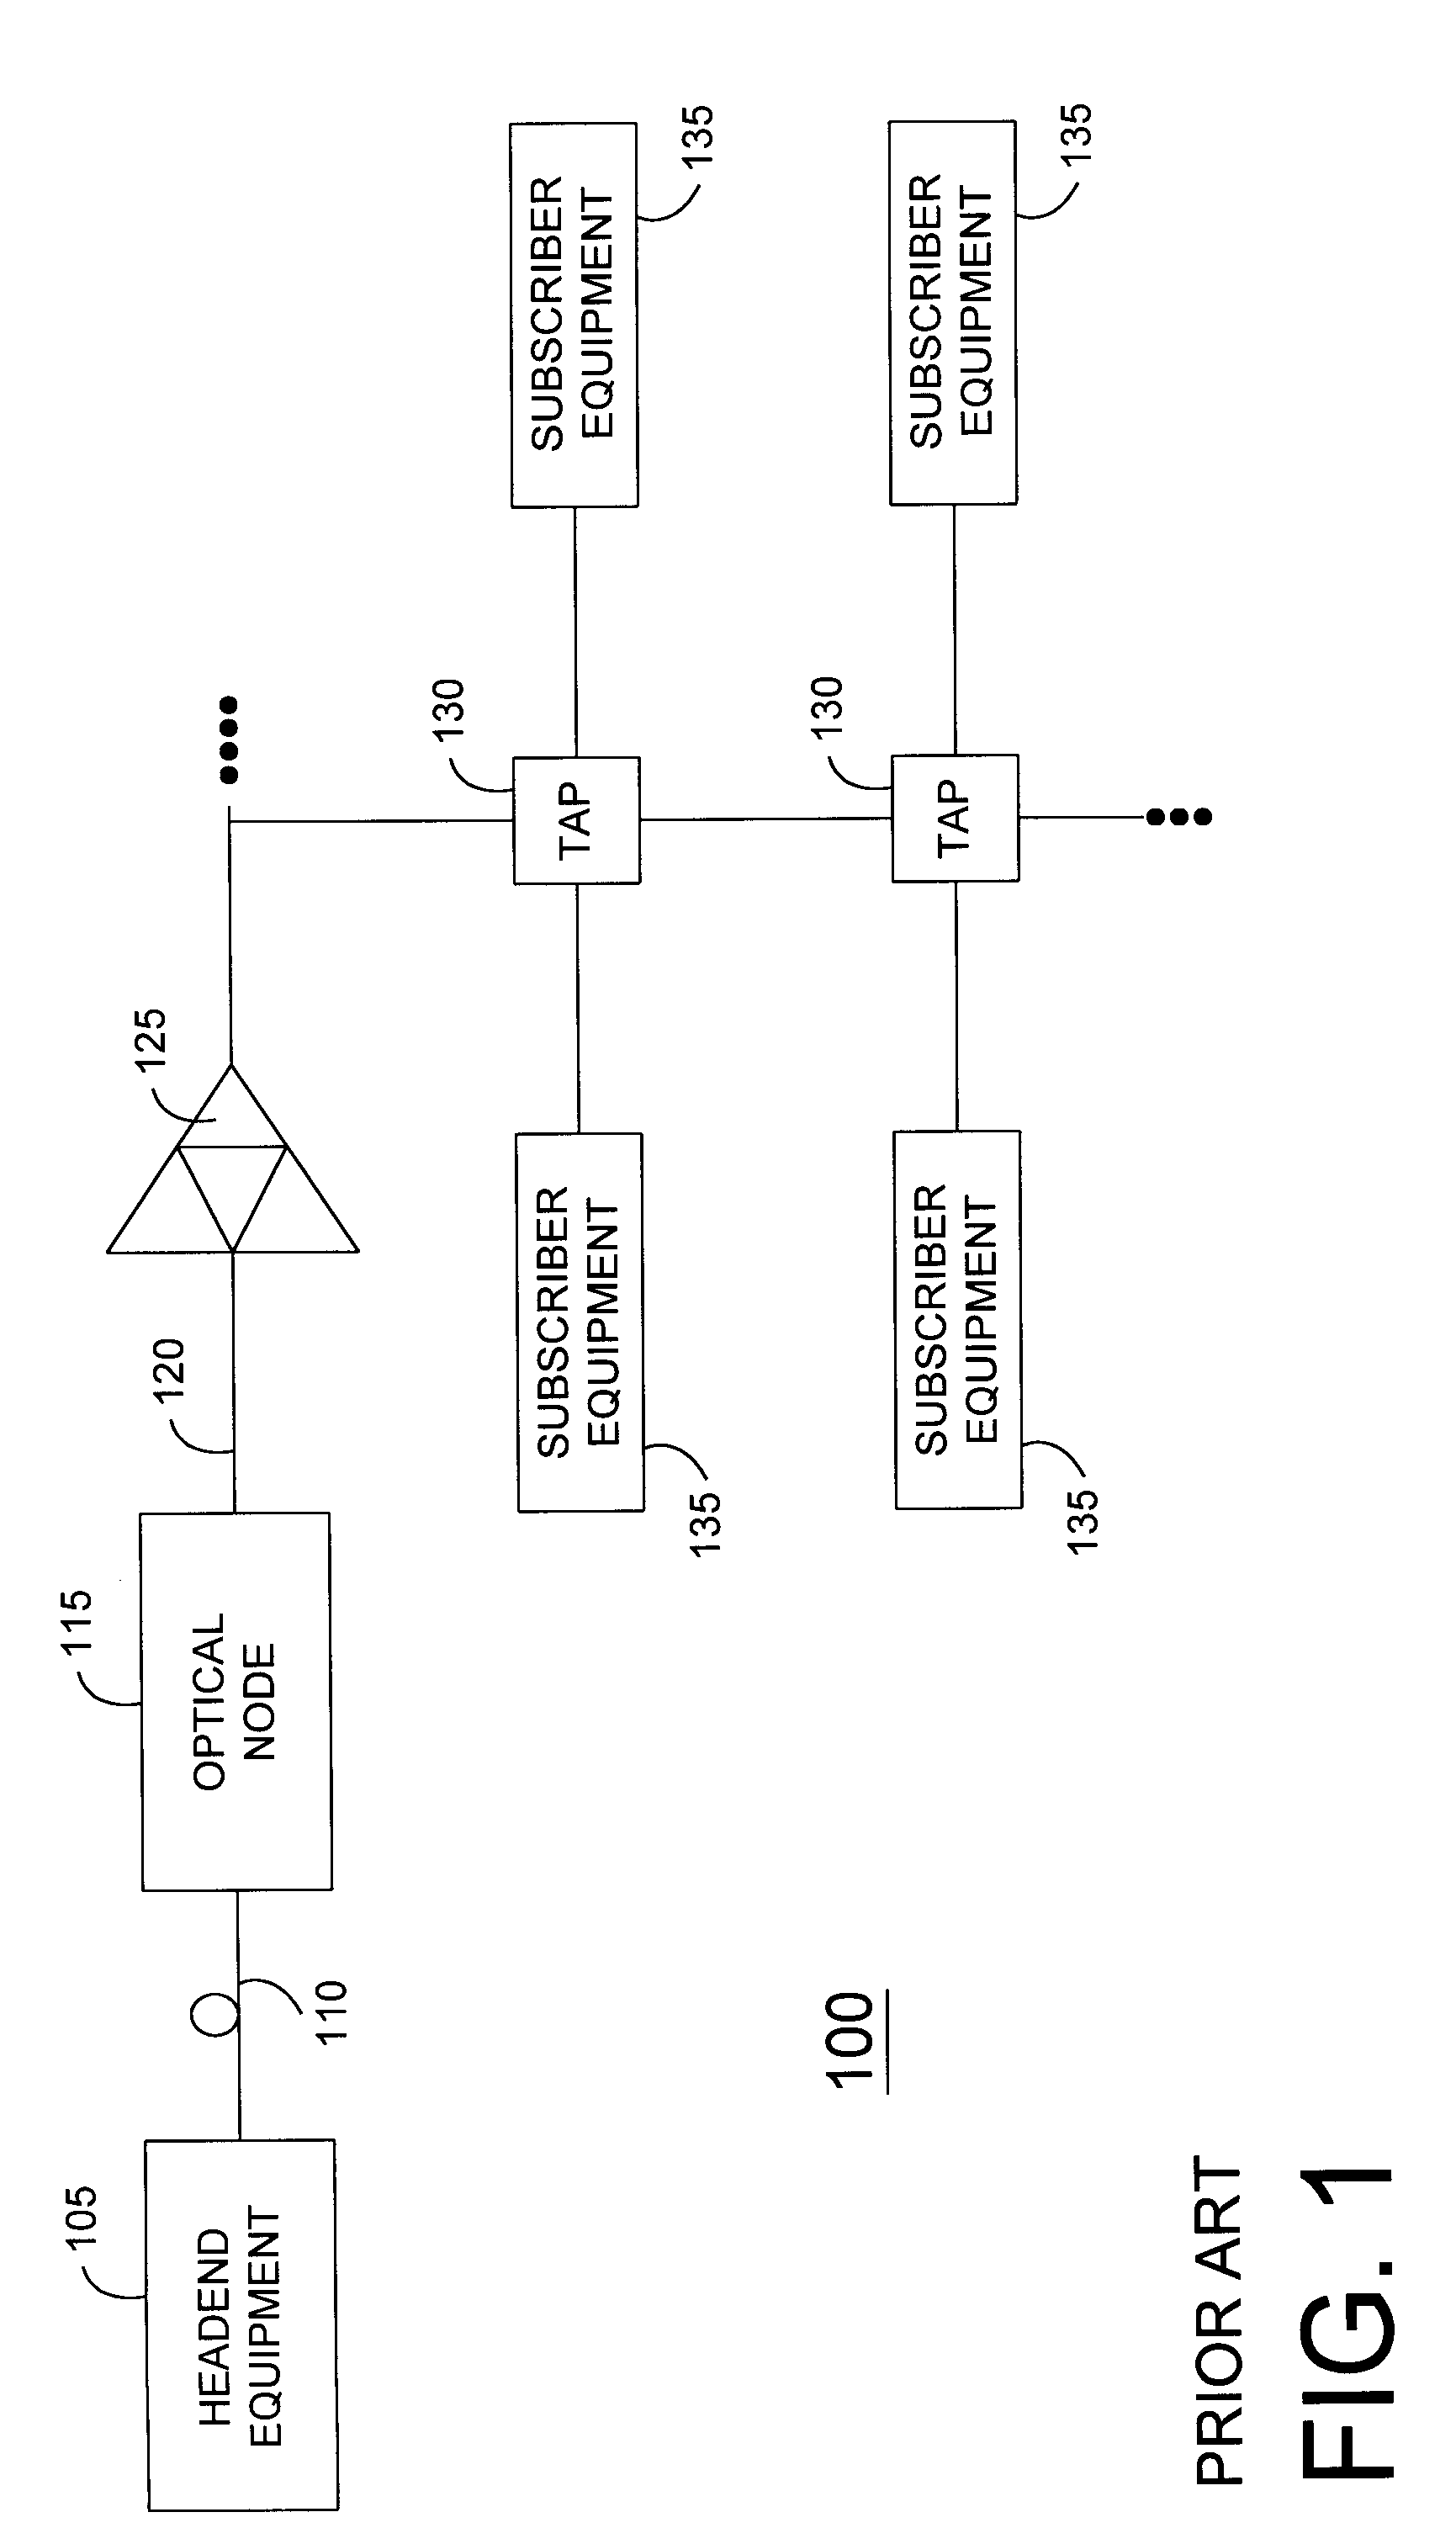 Amplifier with a universal automatic gain control circuit